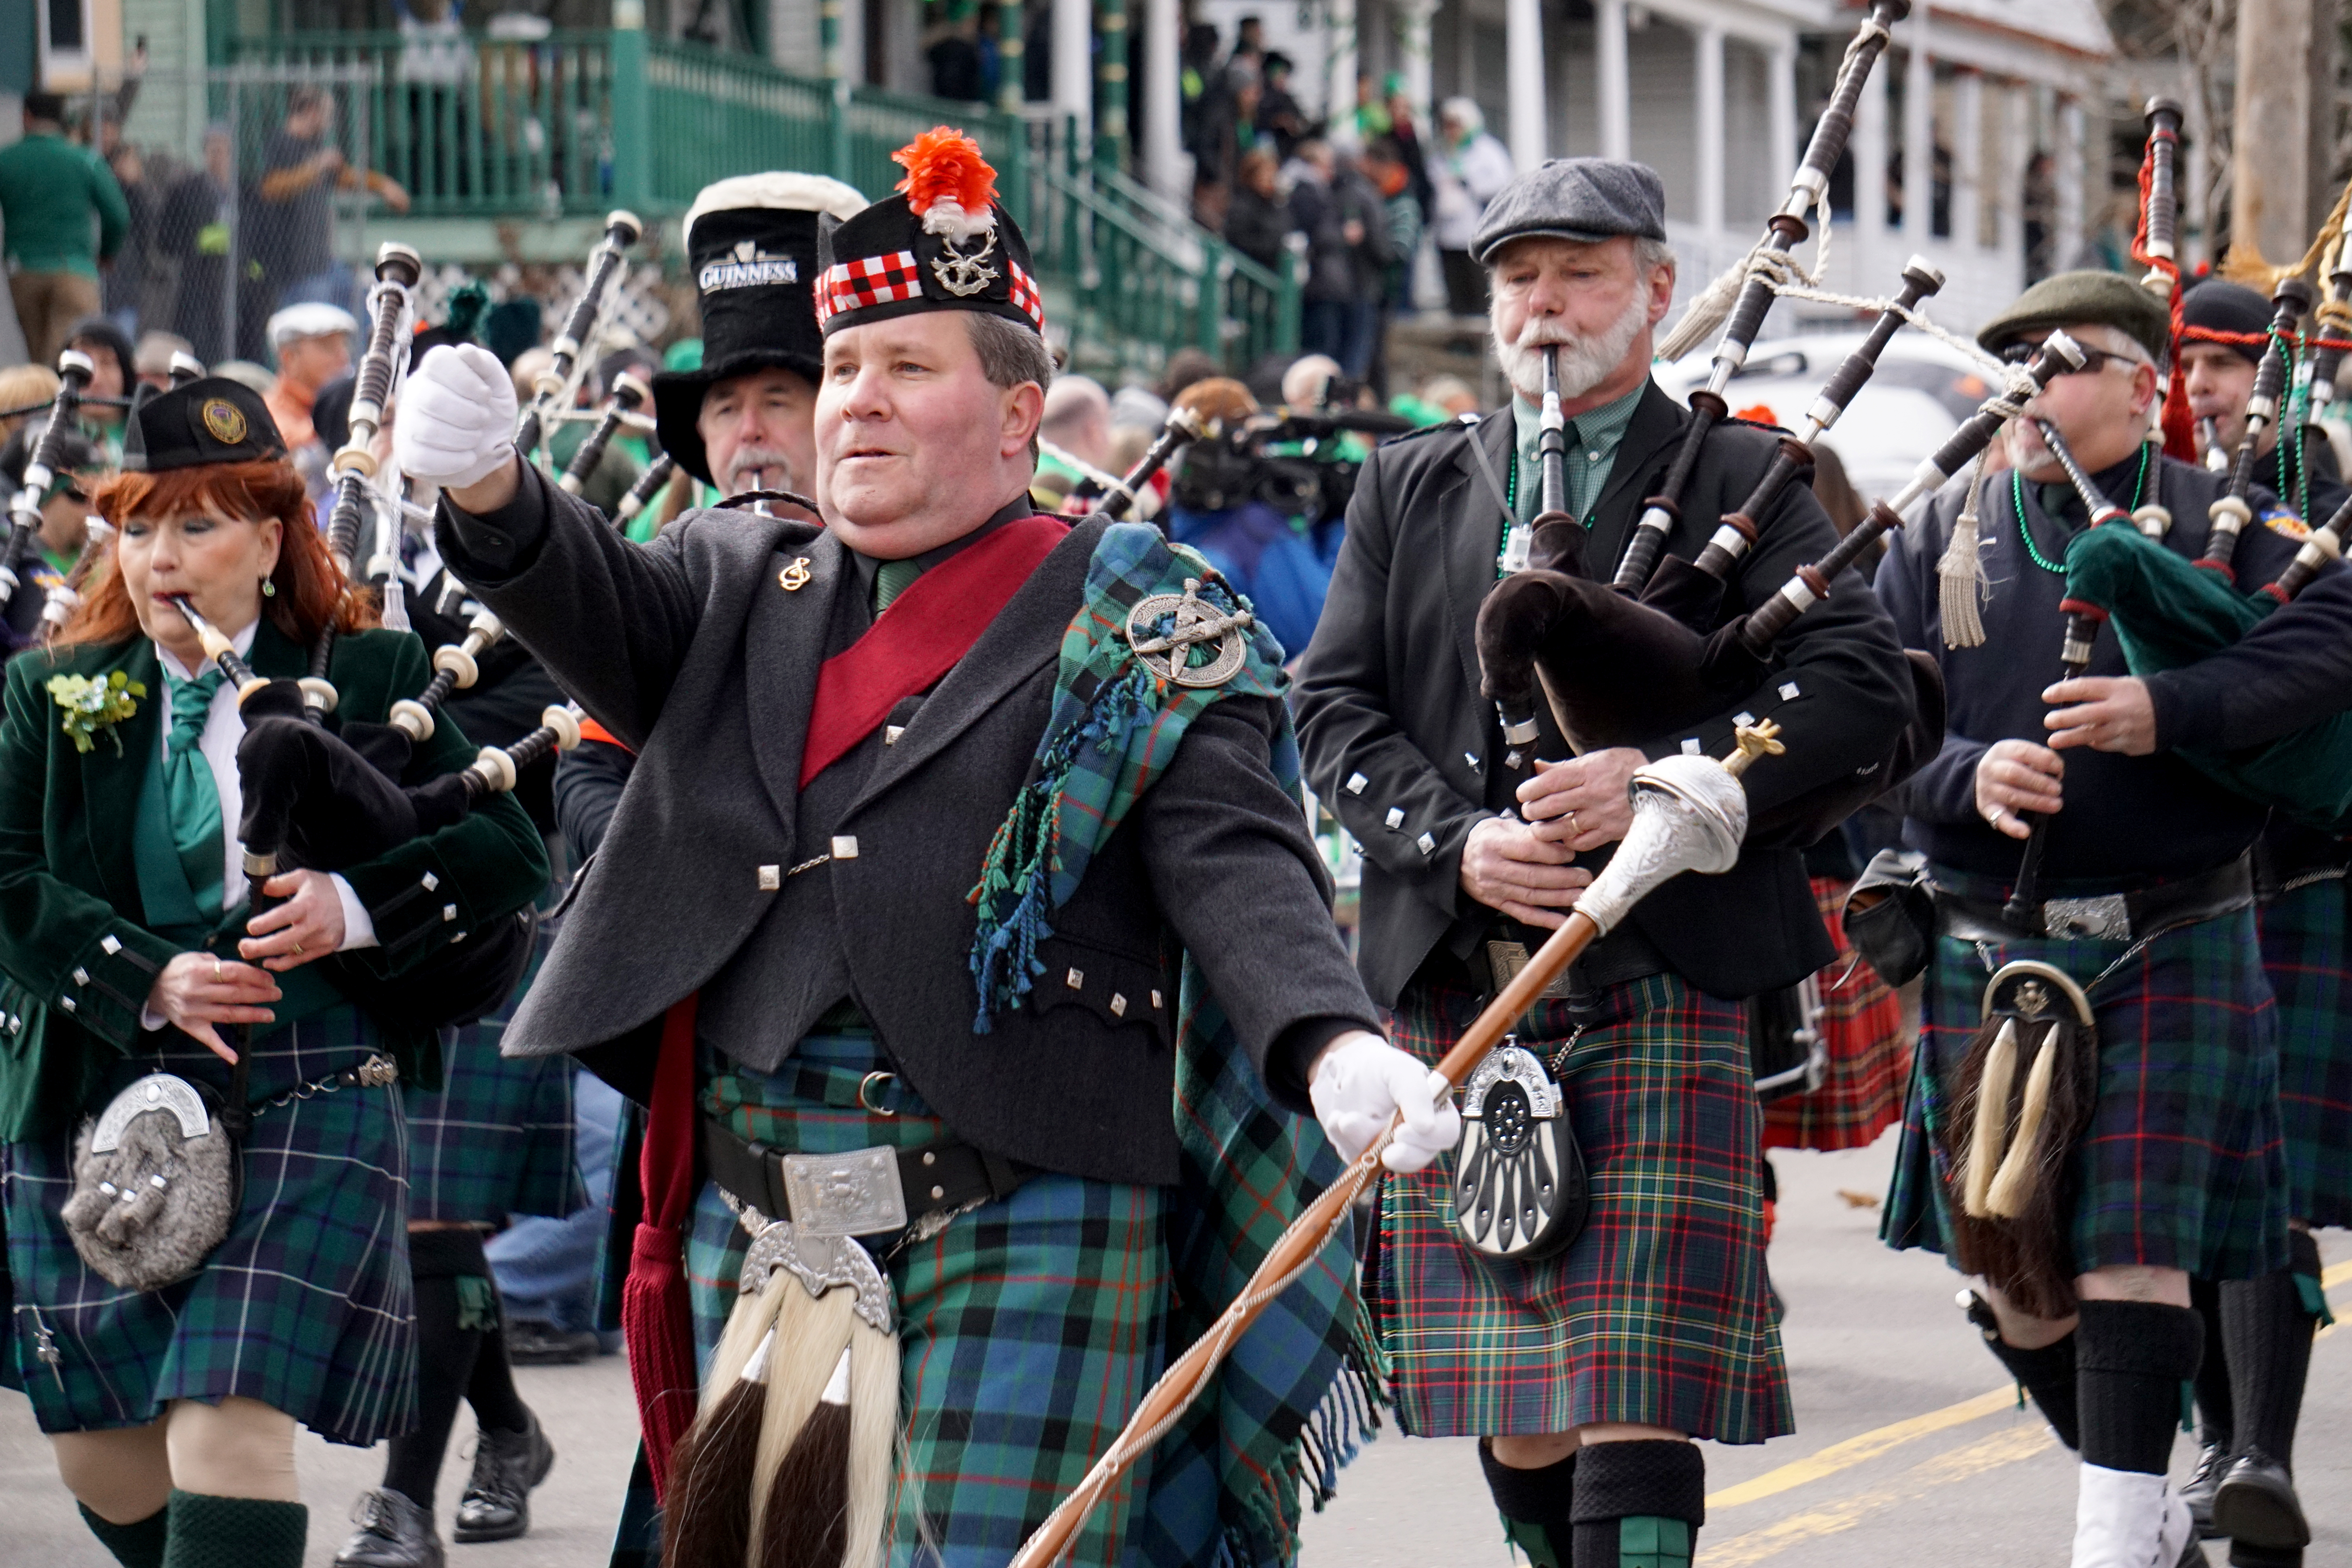 A pipe and drum band kicks off the noon-time parade for Green Beer Sunday. Attendees say the traditional music is a favorite part of the event.